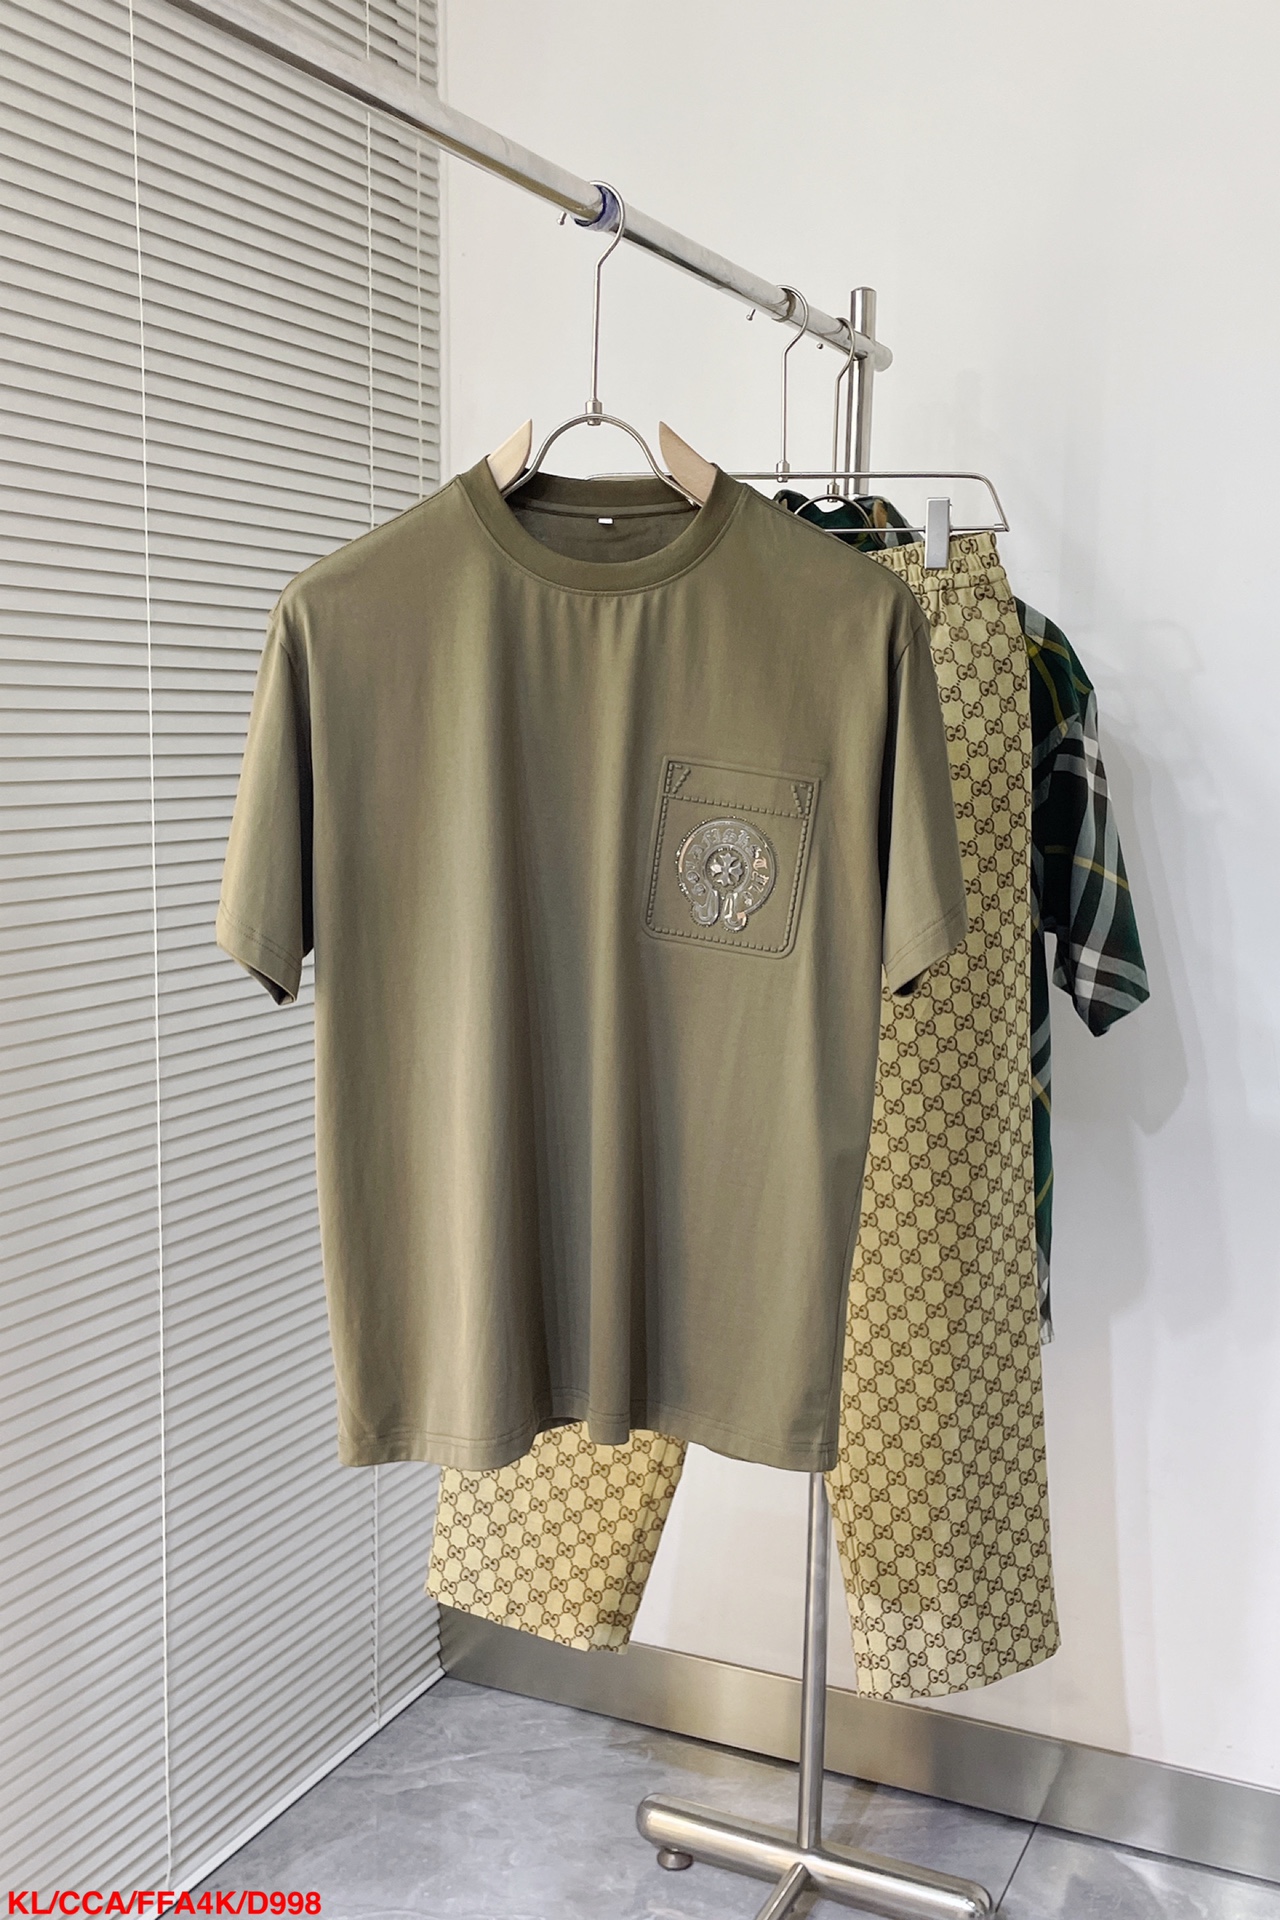 Chrome Hearts Clothing T-Shirt Men Spring/Summer Collection Fashion Short Sleeve